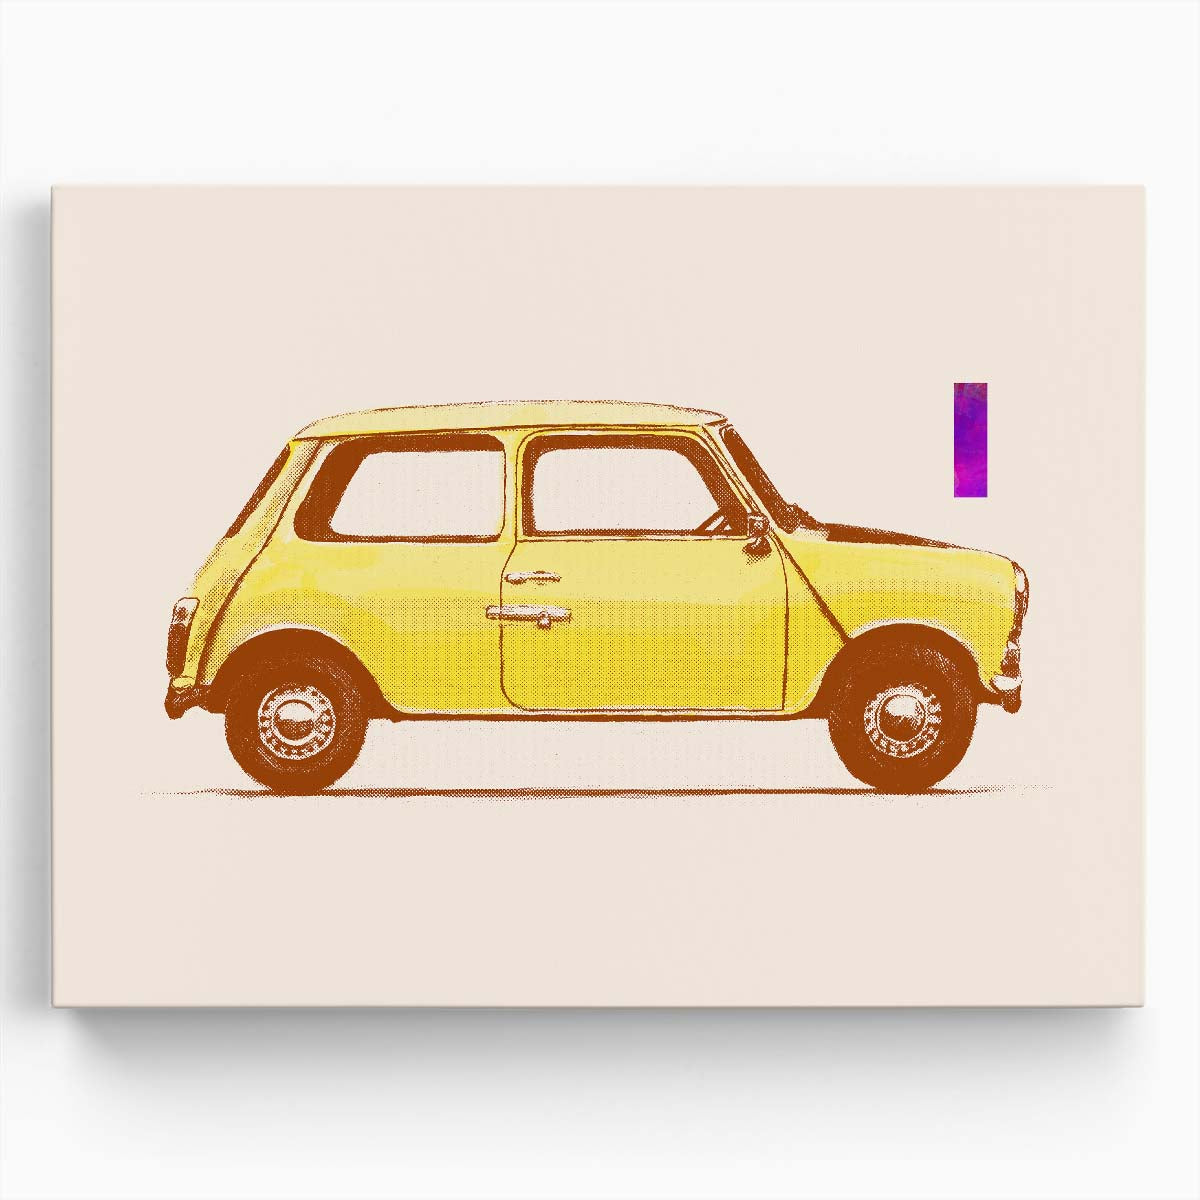 Vintage Classic Mini Mr. Bean's Yellow Car Wall Art by Luxuriance Designs. Made in USA.